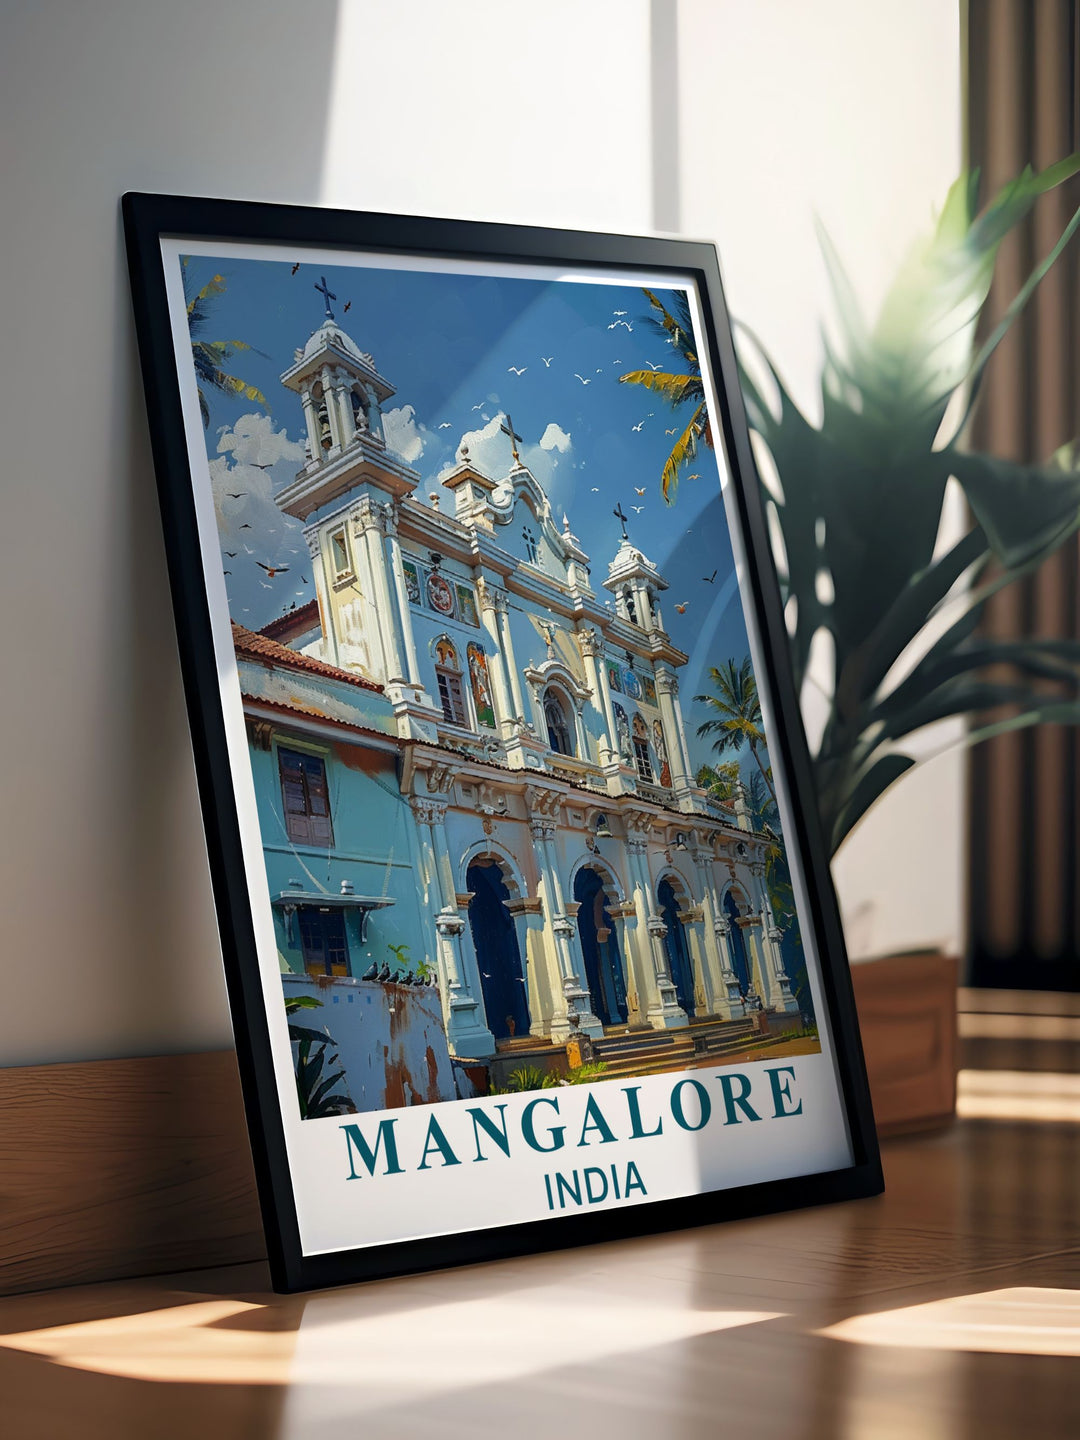 This travel poster of Mangalore highlights the citys dynamic atmosphere and its proximity to the historic St. Aloysius Chapel, making it a perfect piece for those who love diverse cultural and architectural landmarks.